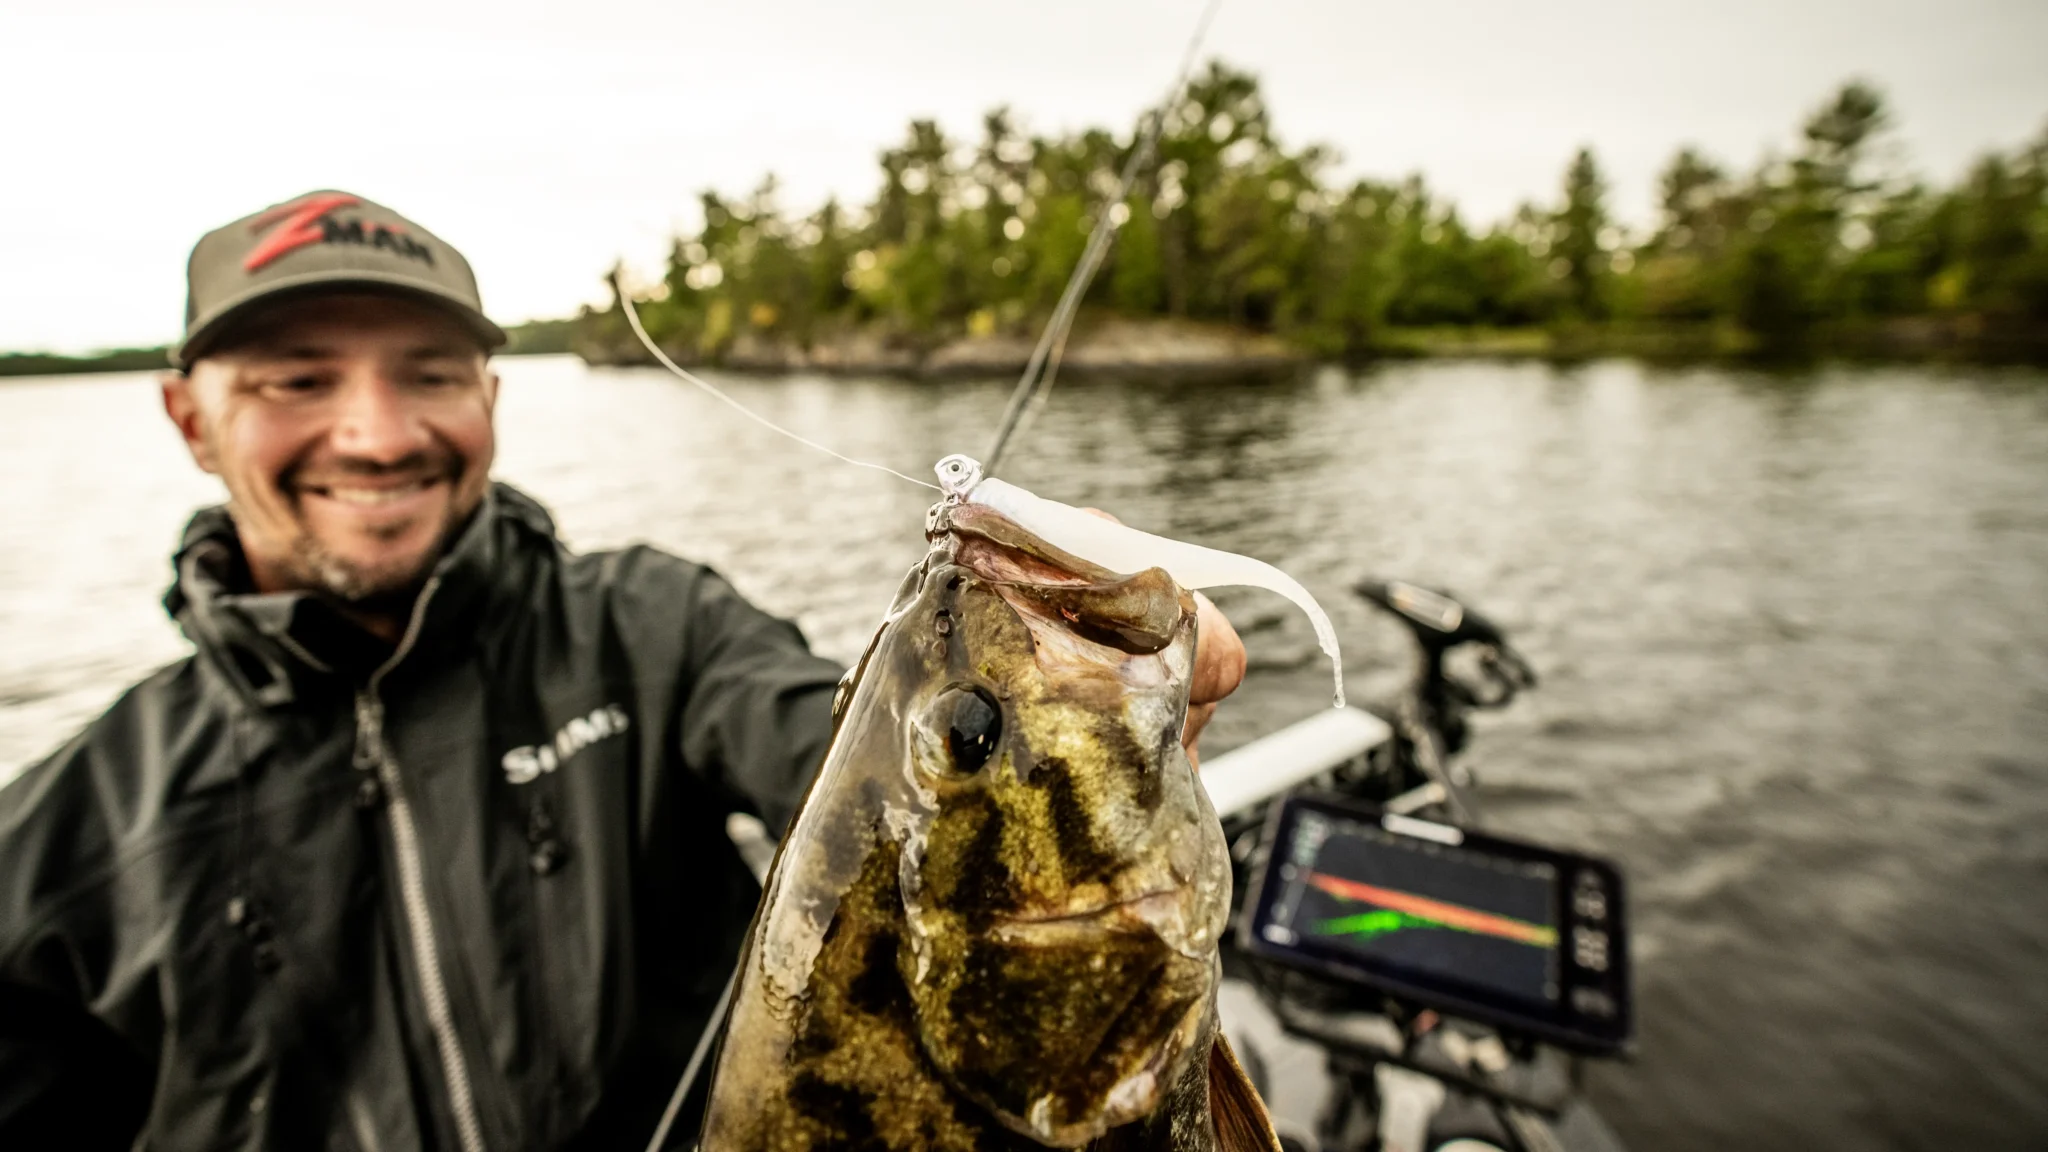 The Great Jig and Minnow Migration in Bass Fishing - Wired2Fish